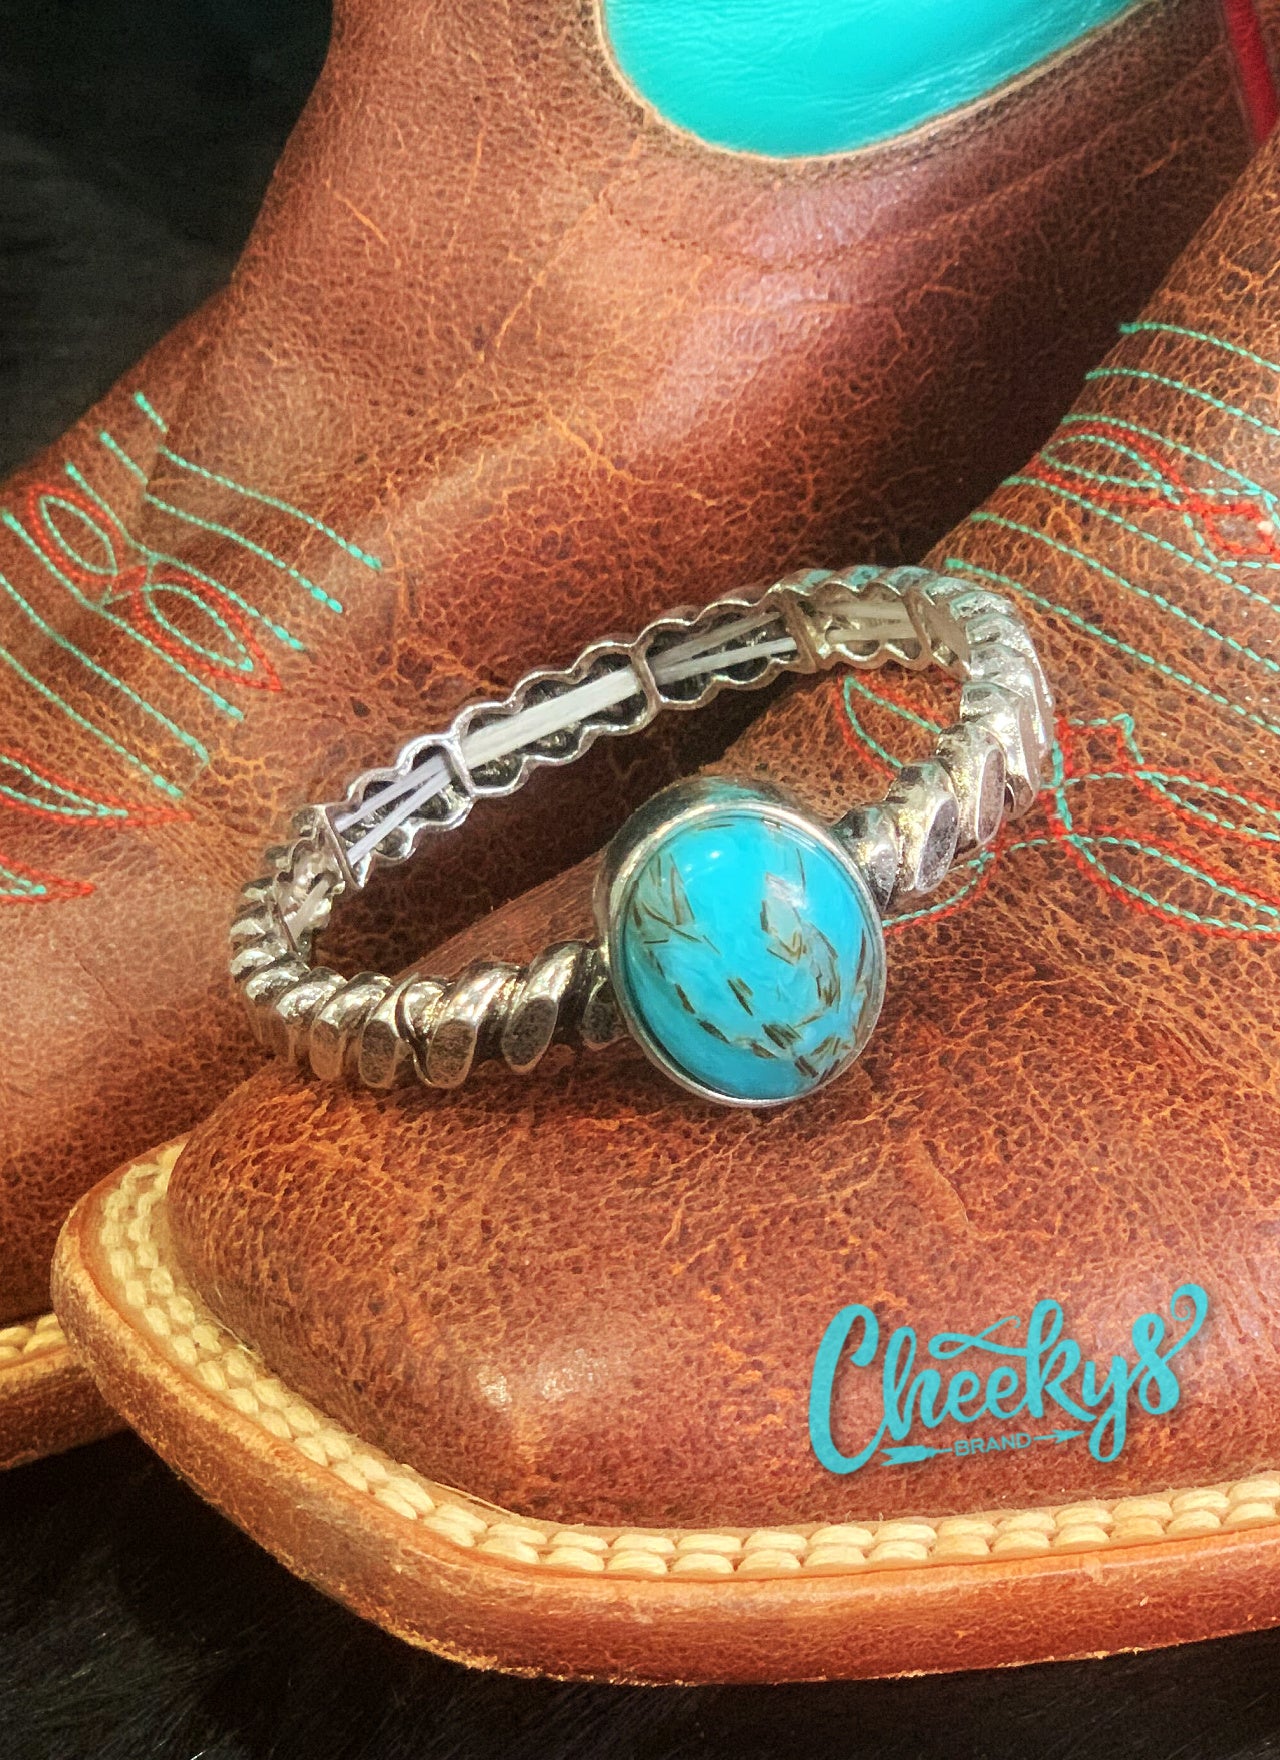 The Bessy Stretch Bracelet in Turquoise Jewelry 19 